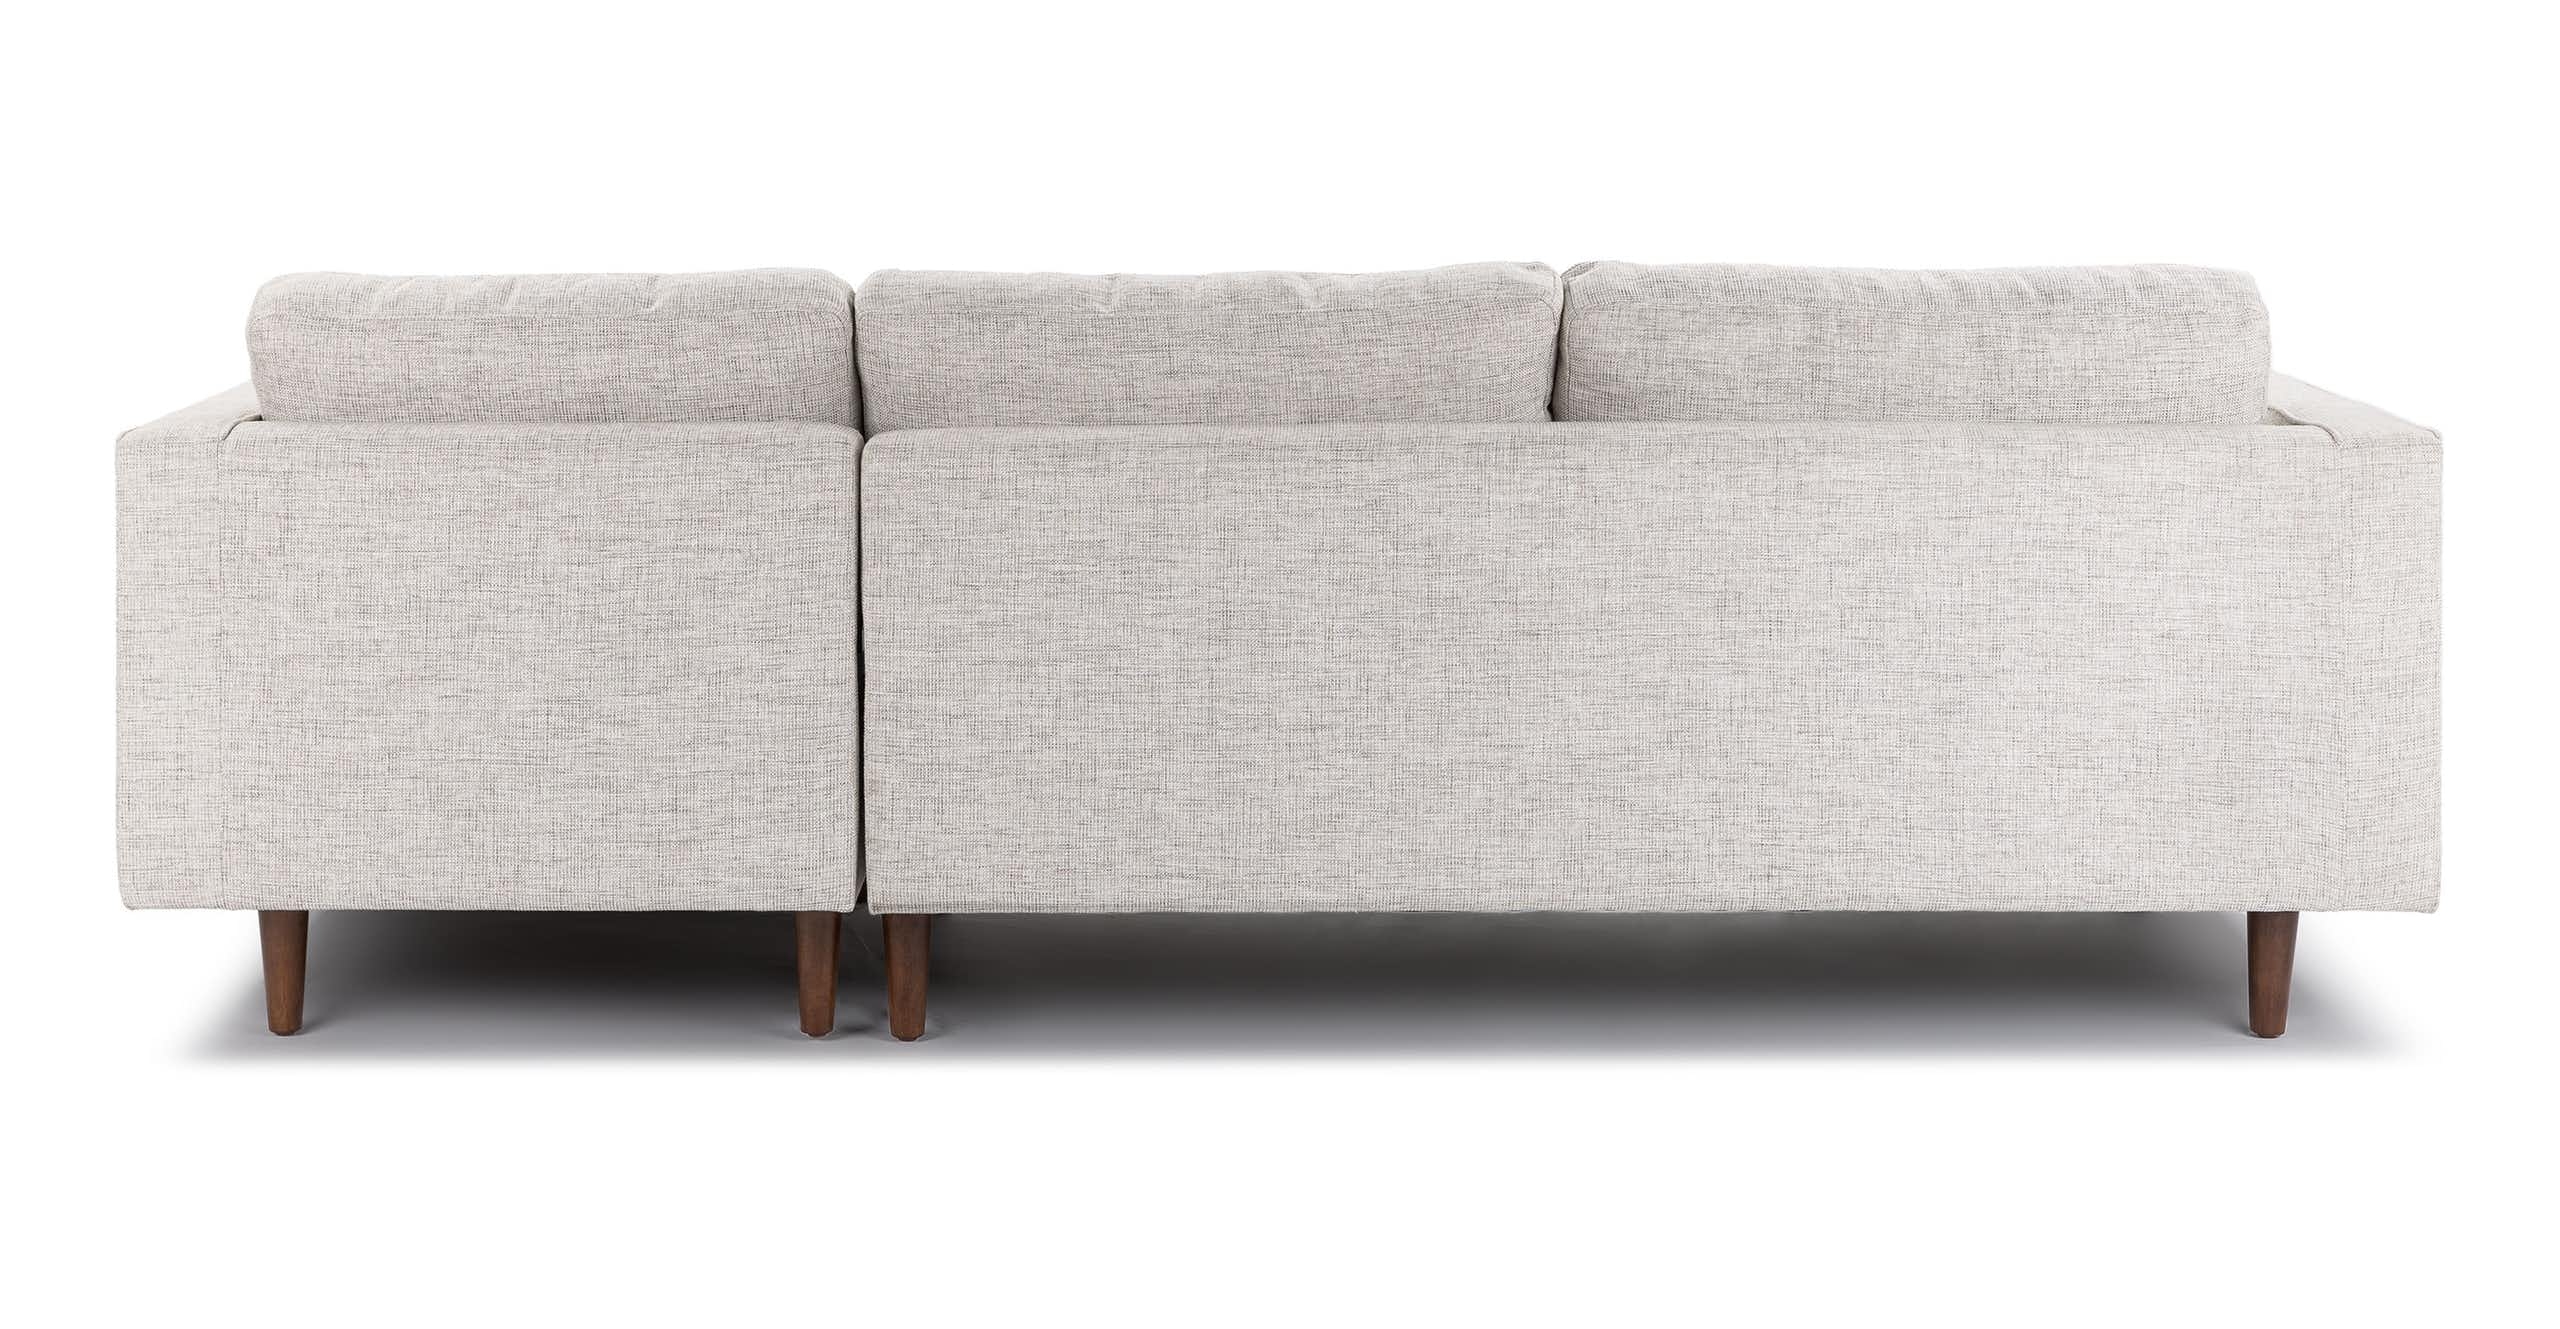 Sven Birch Ivory Right Sectional Sofa - Image 3